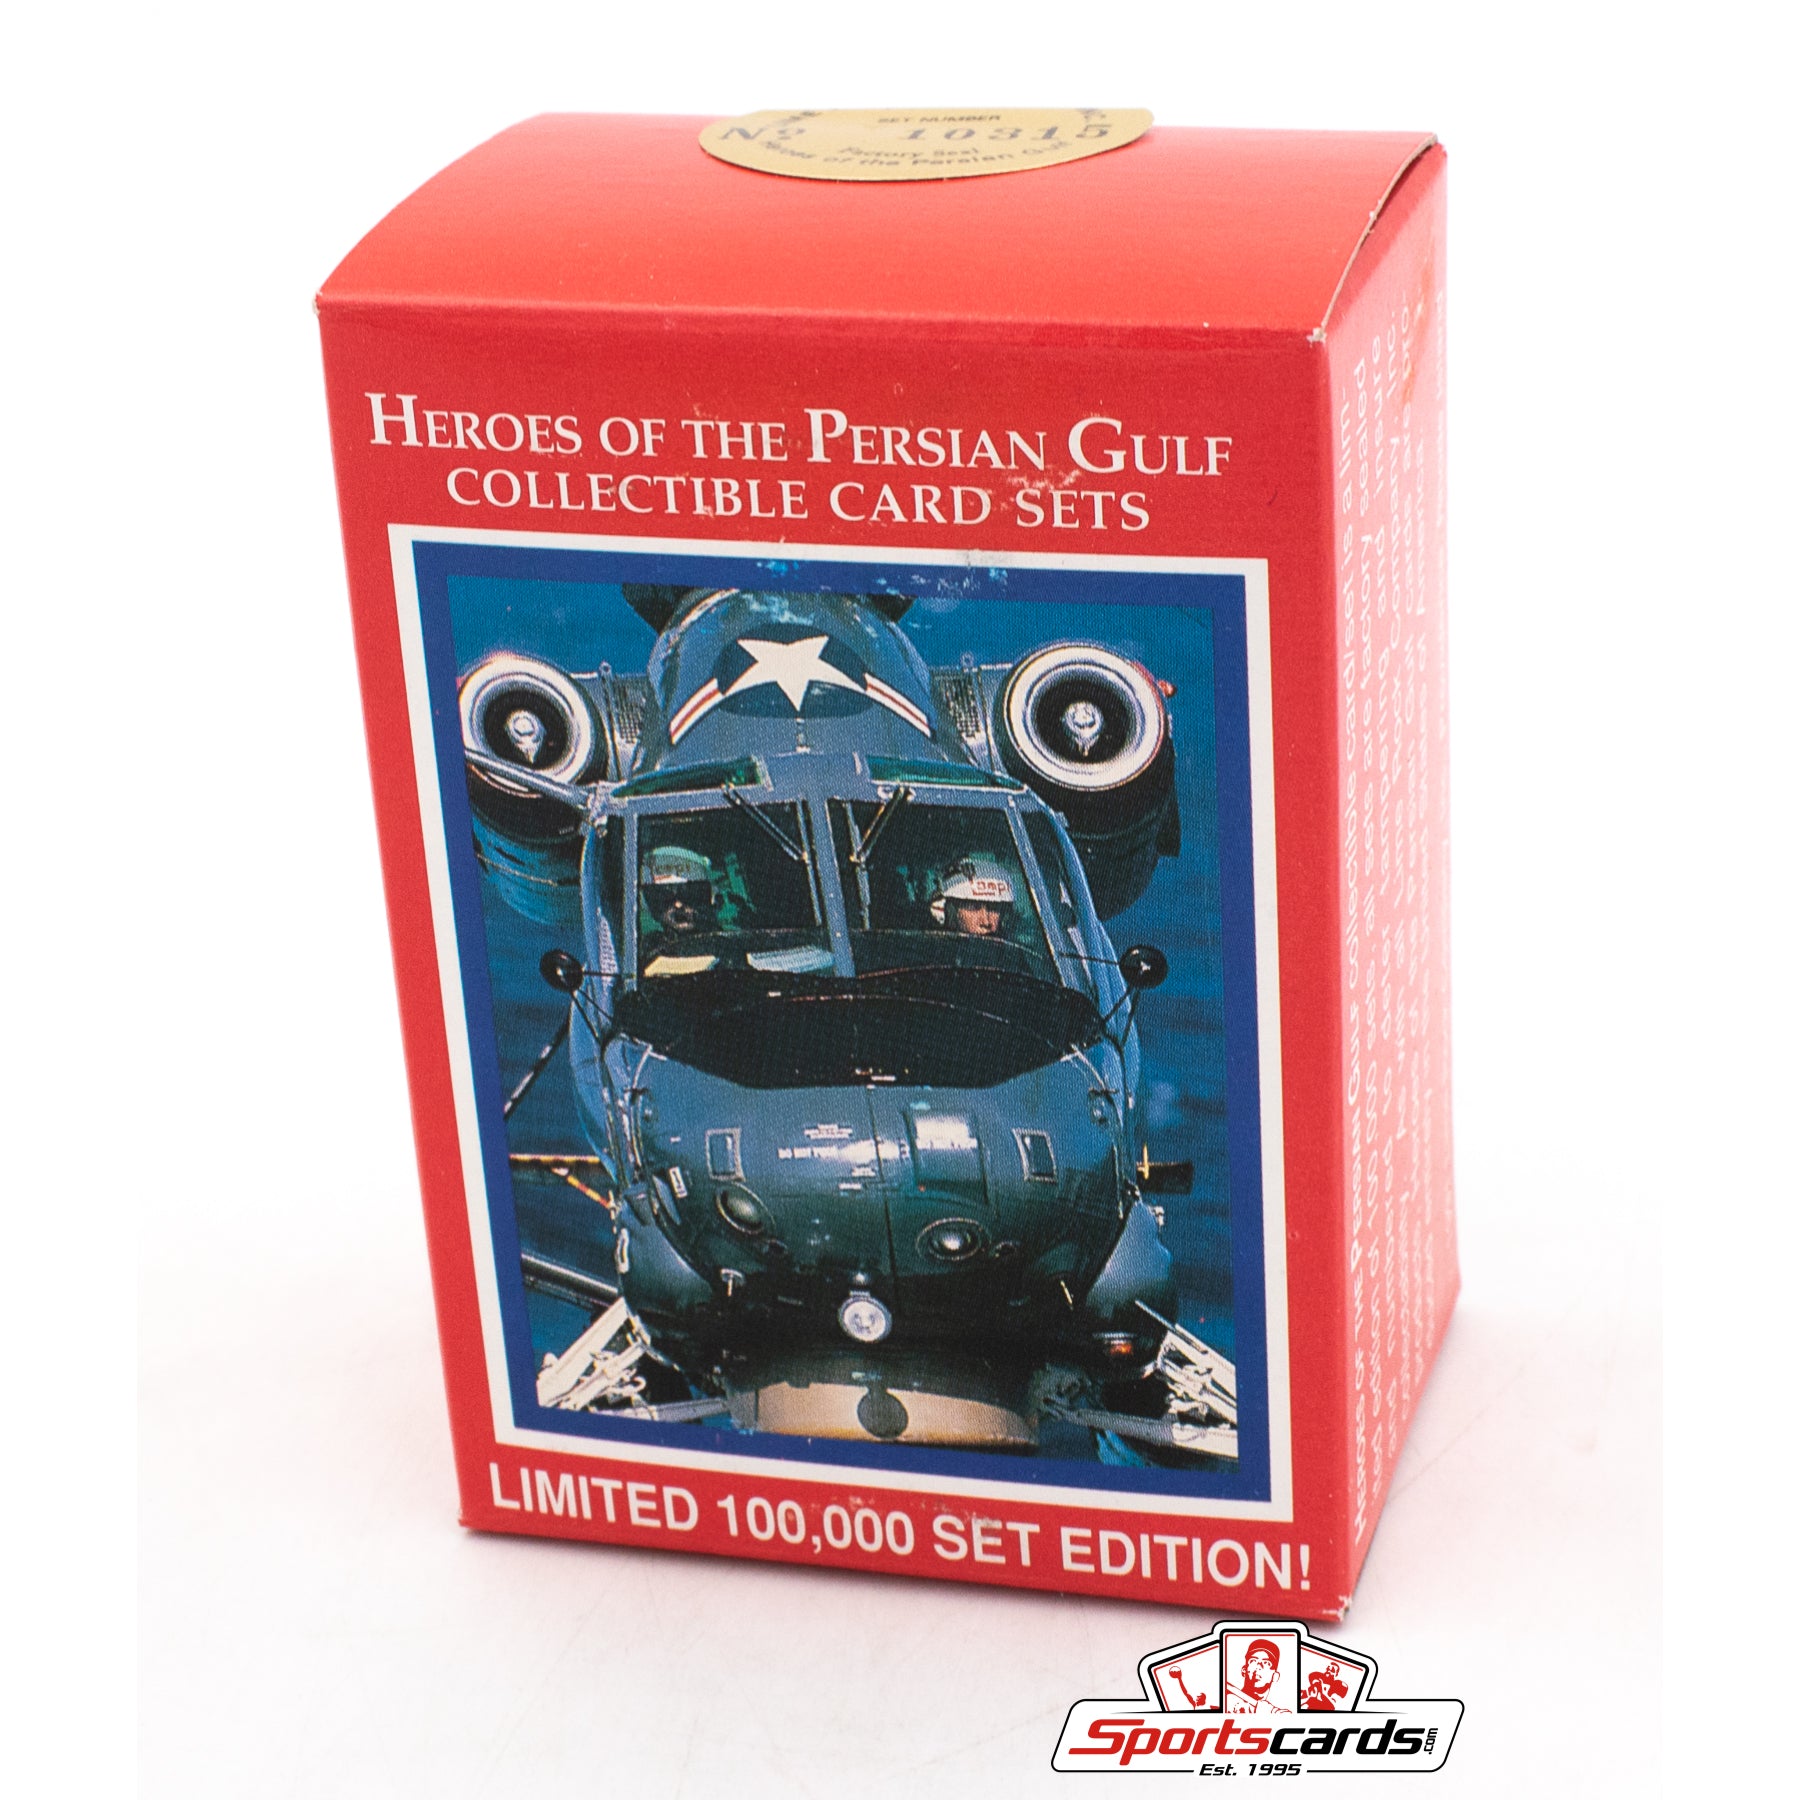 1991 Heroes of the Persian Gulf Collectible Card Set Box